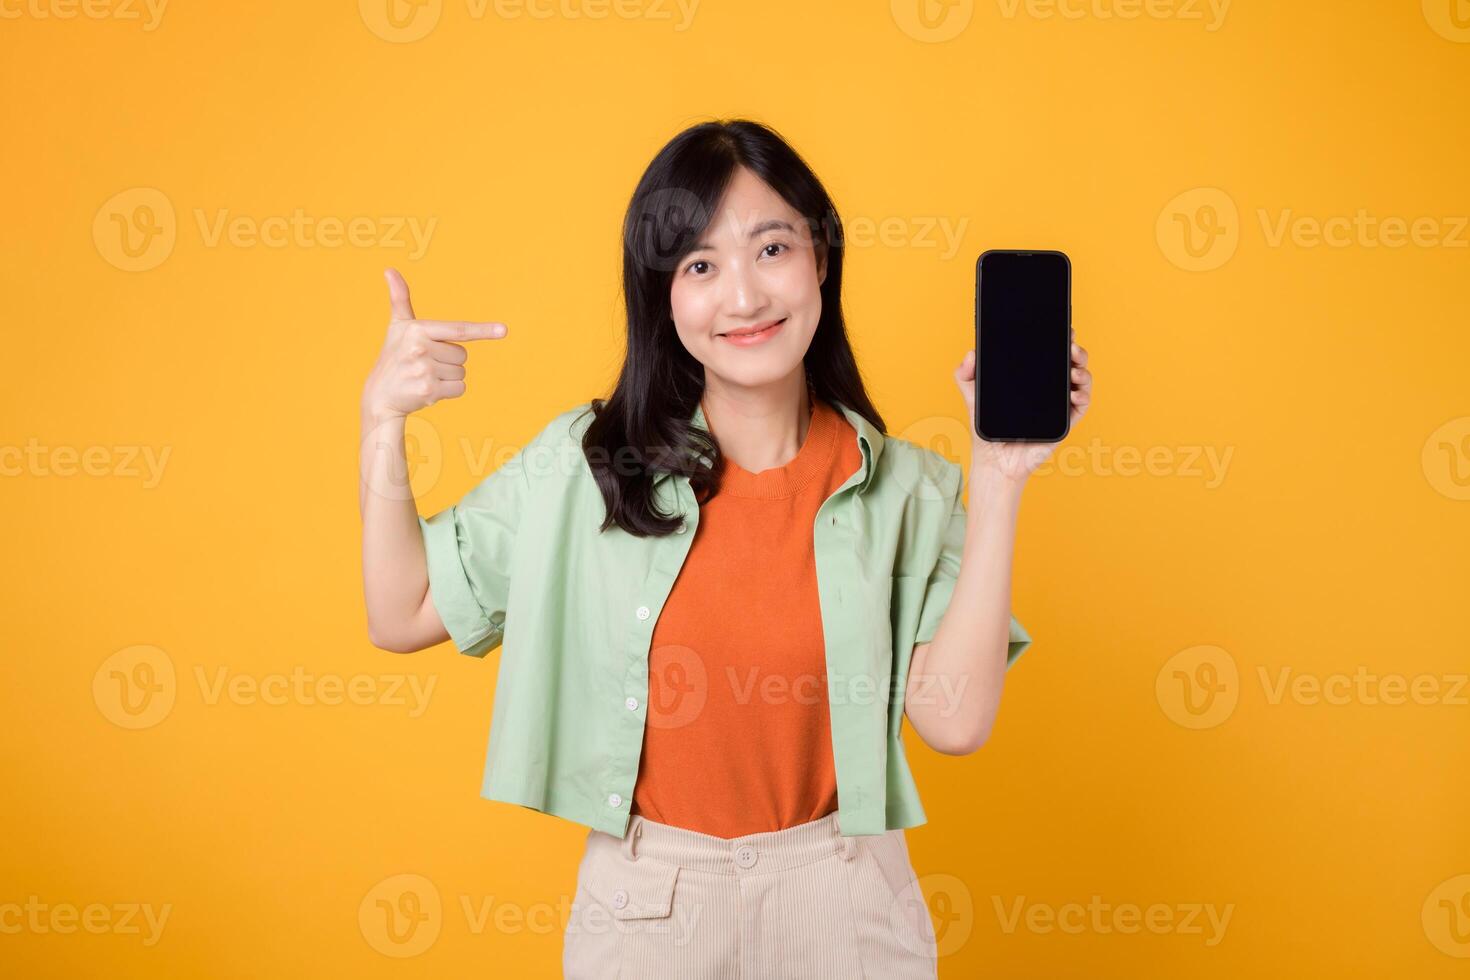 the innovation of new mobile application with young Asian woman 30s, elegantly dressed in orange shirt and green jumper, presenting smartphone screen with thumbs-up gesture on yellow background photo